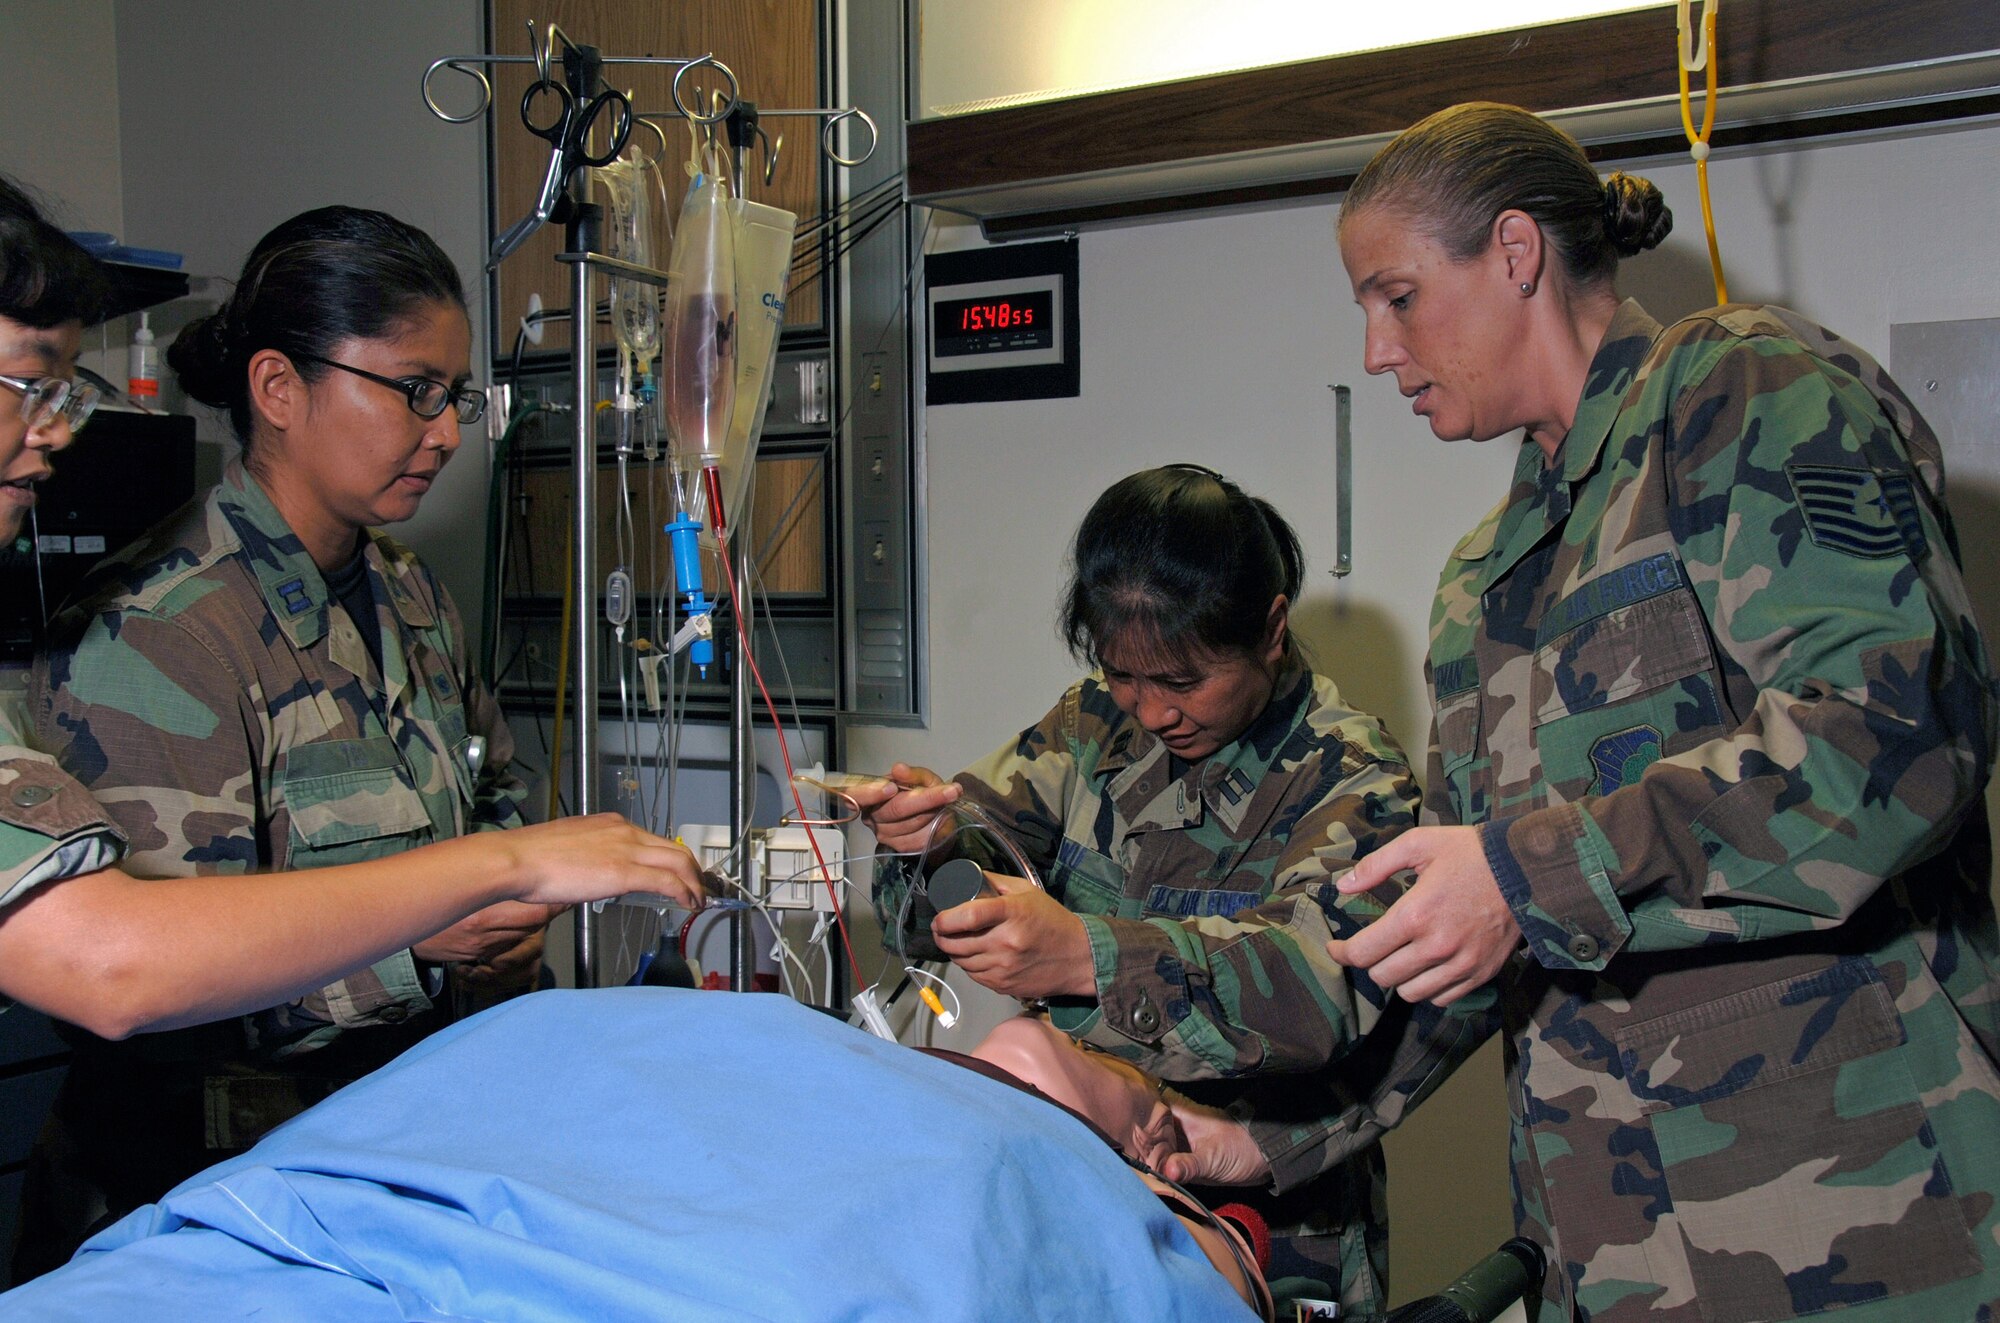 Capt. Yun Wu (center) practices patient intubation on a simulation mannequin Aug. 13, assisted by Tech. Sgt. Tammy Freeman and Capt. Lenora Tso during a trauma and pre-deployment training course at Wilford Hall Medical Center at Lackland Air Force Base, Texas. Medical technicians and nurses participated in the trauma and pre-deployment course in preparation for deployments to Iraqi and Afghanistan. Captains Wu and Tso are clinical nurses and Sergeant Freeman is a medical technician.  They are assigned to the 59th Medical Wing. (U.S. Air Force photo/Master Sgt. Kimberly A. Yearyean-Siers)